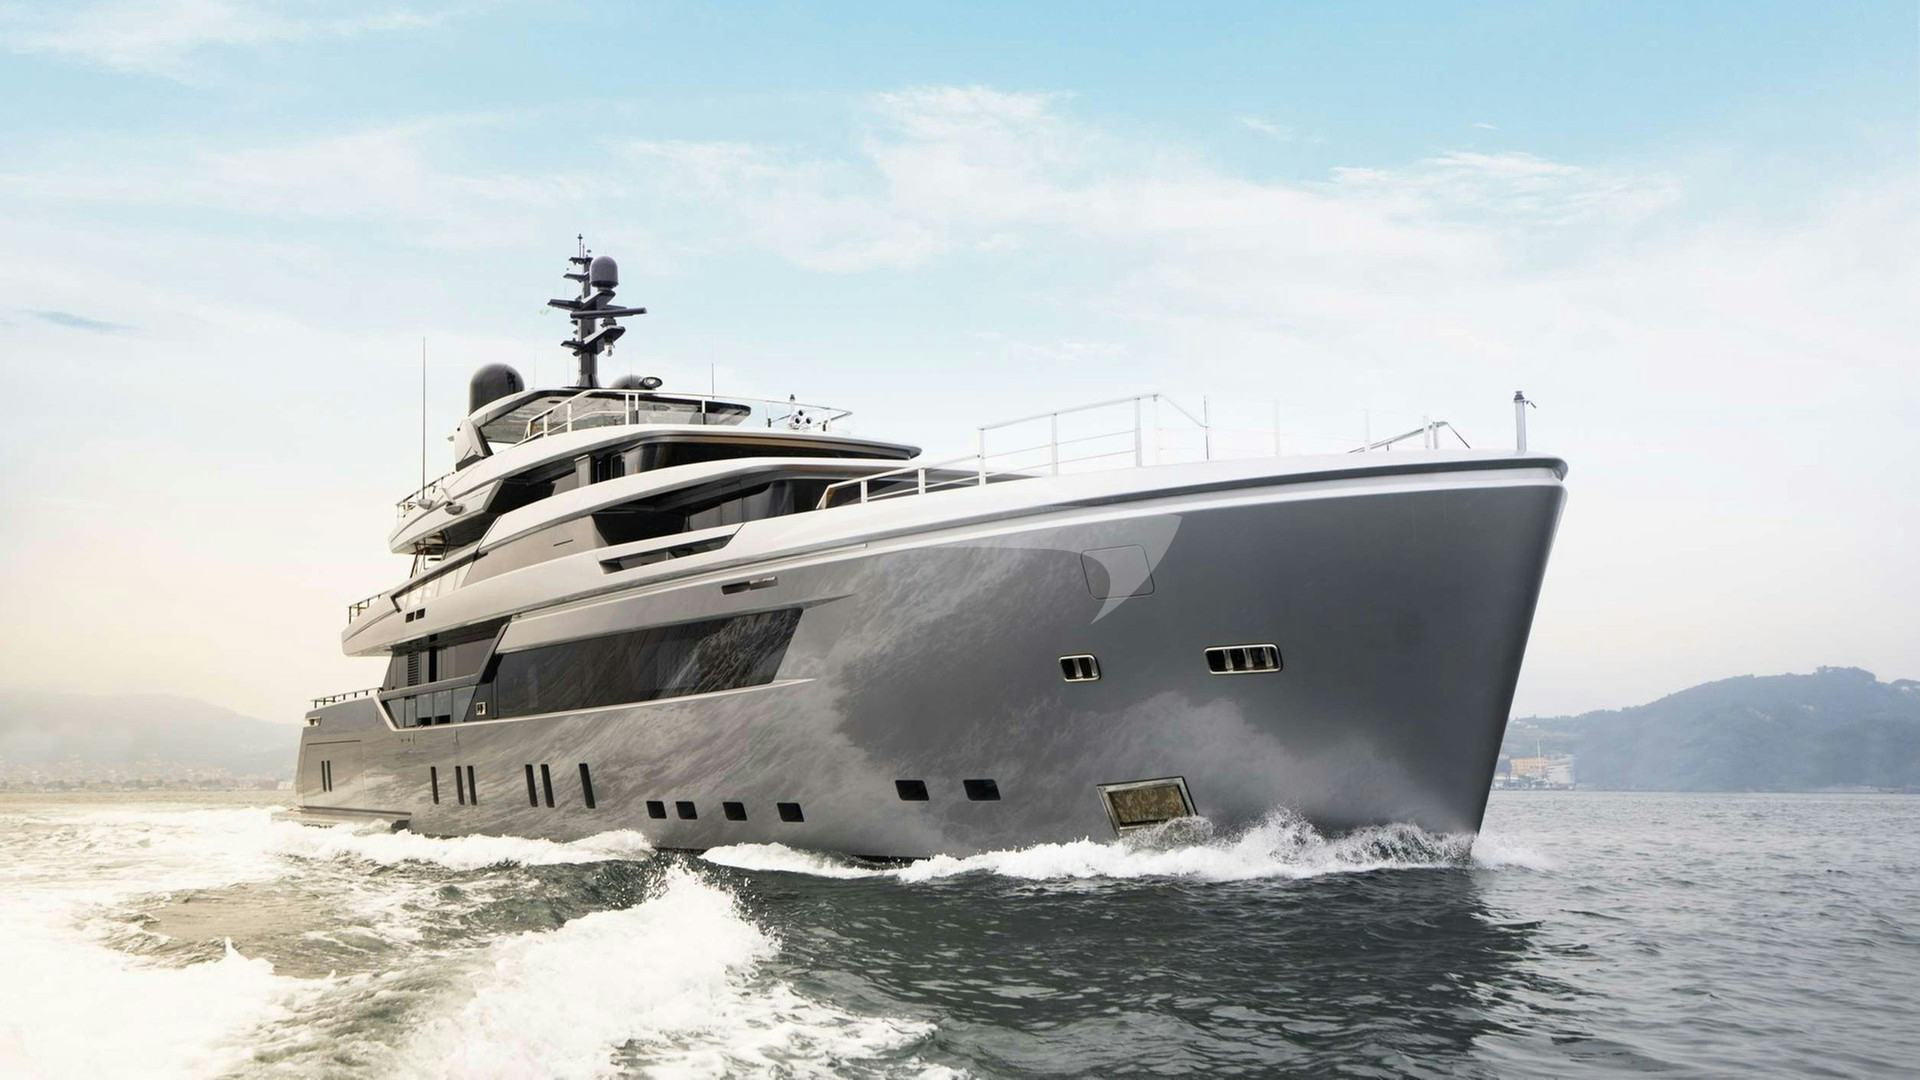 pandion pearl yacht cost